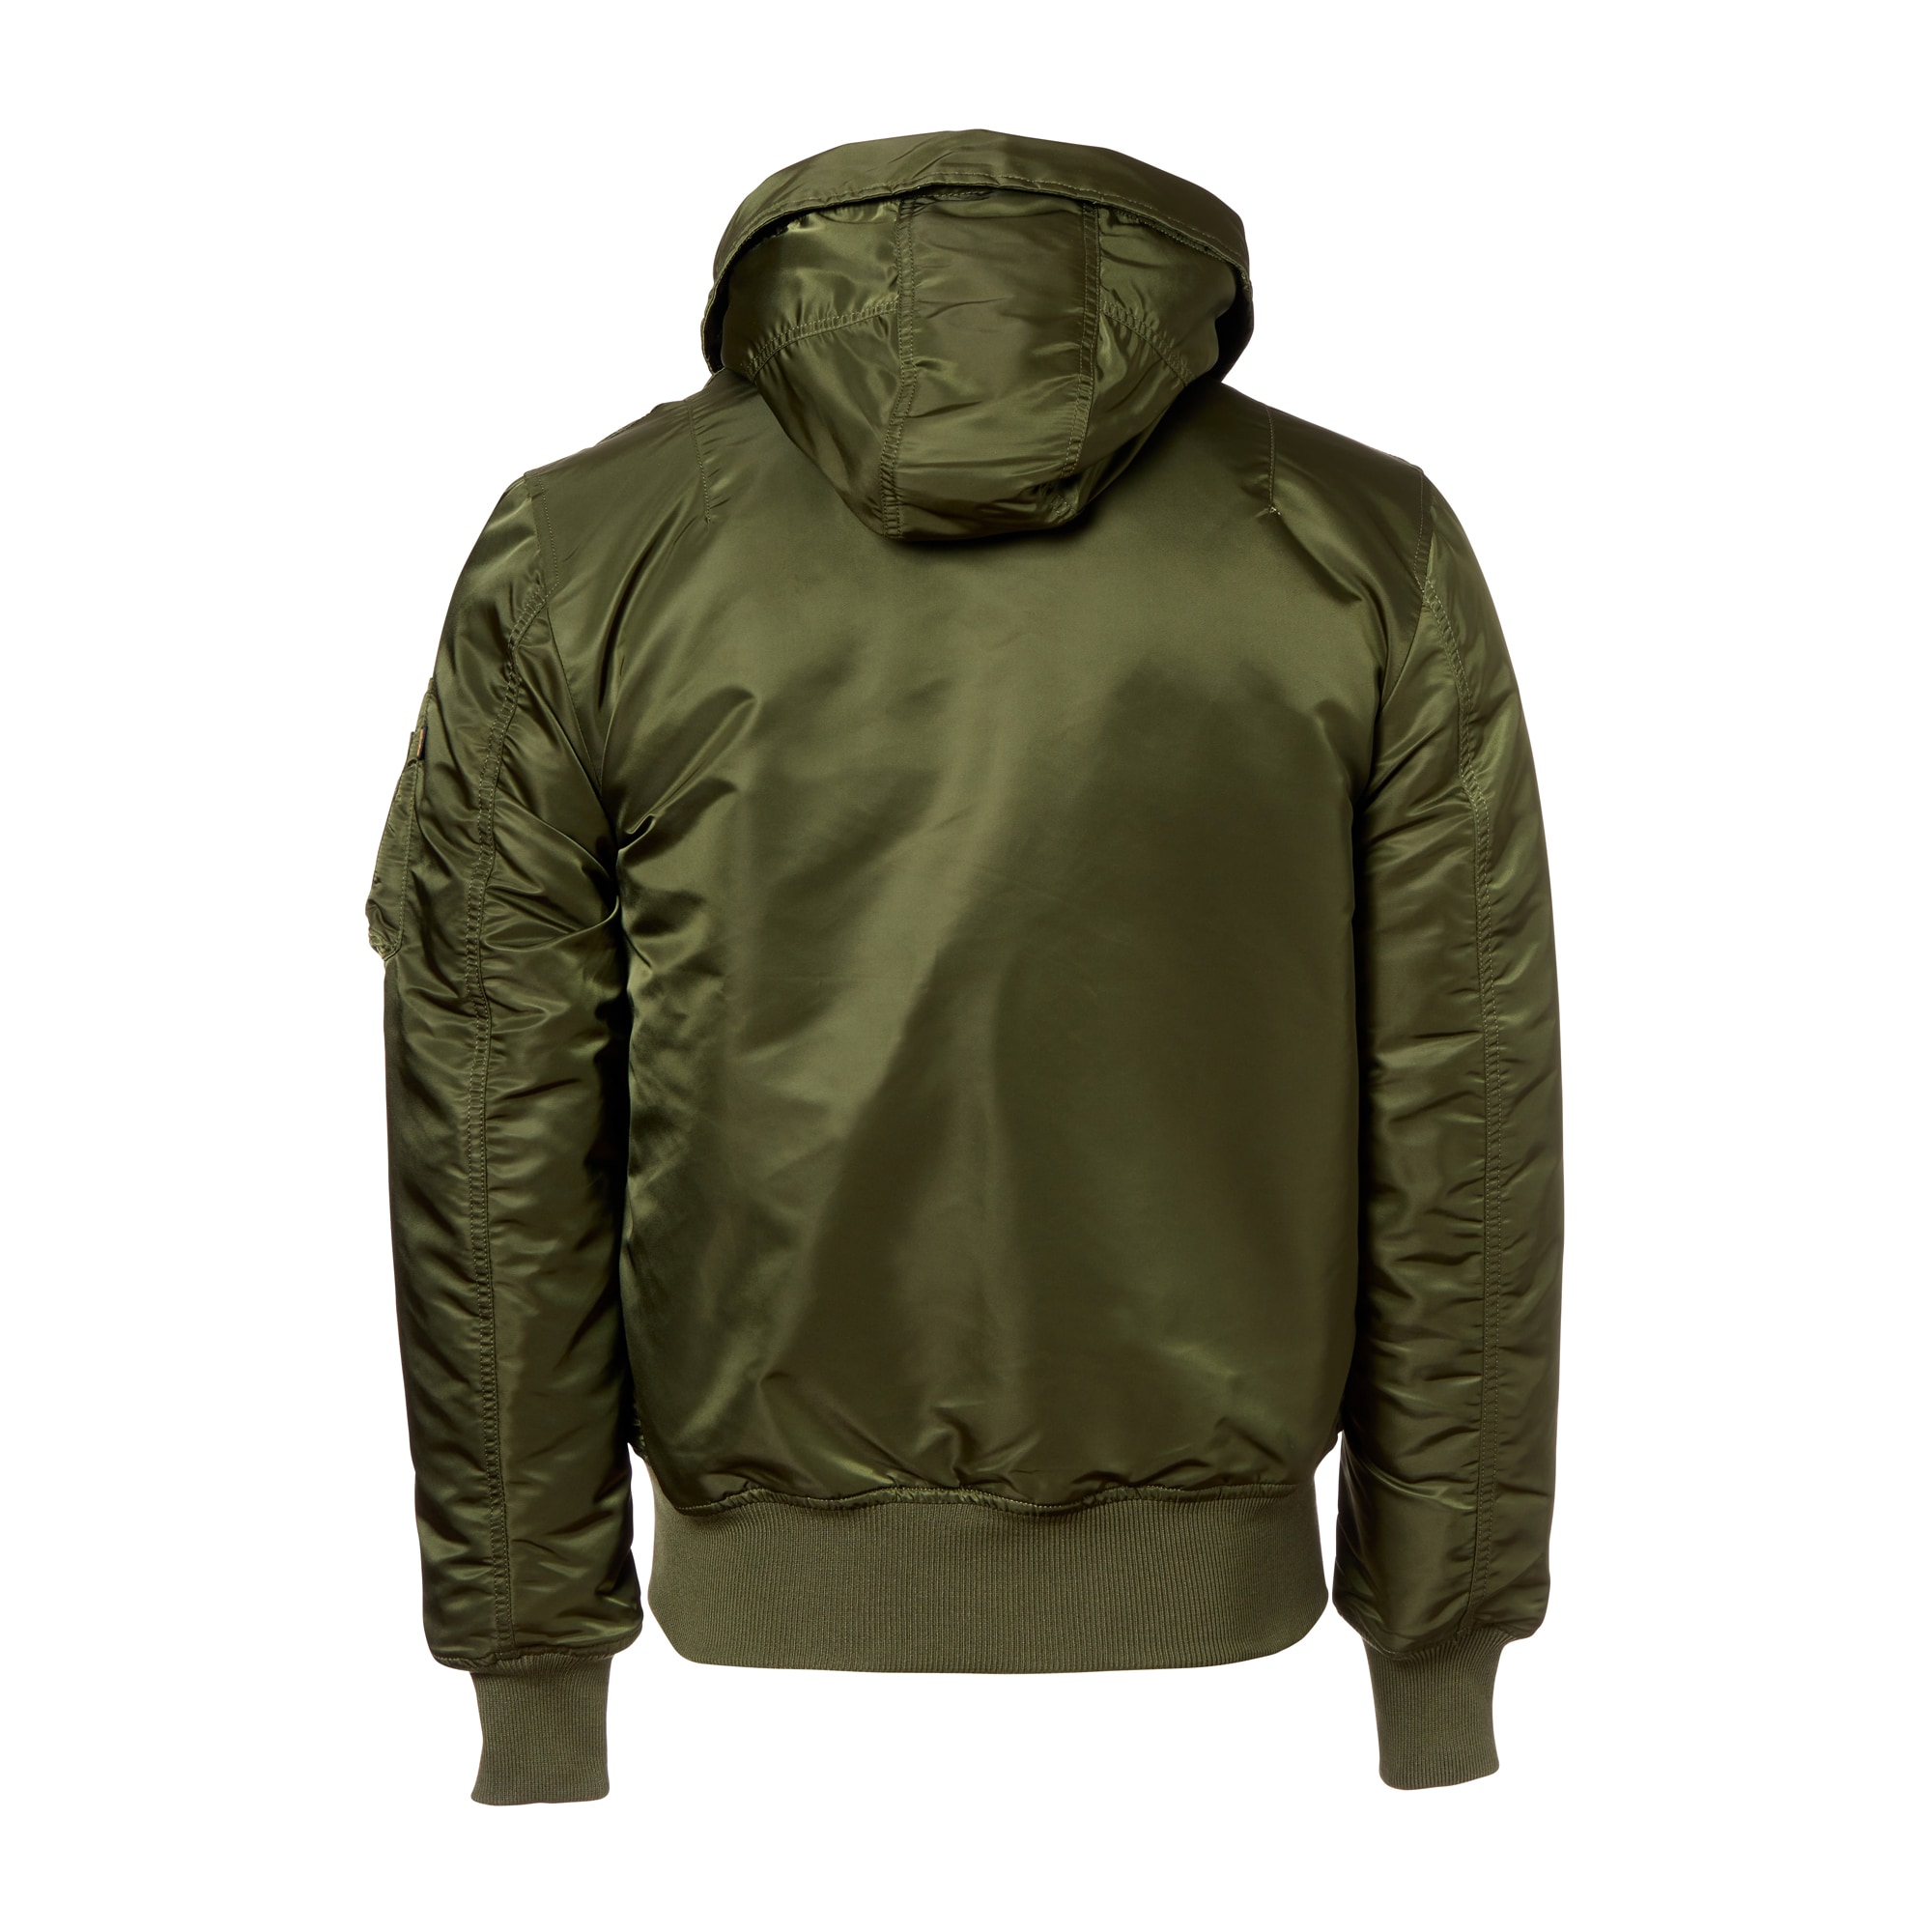 Purchase the Alpha Industries Flight Jacket MA-1 Hooded sage gre